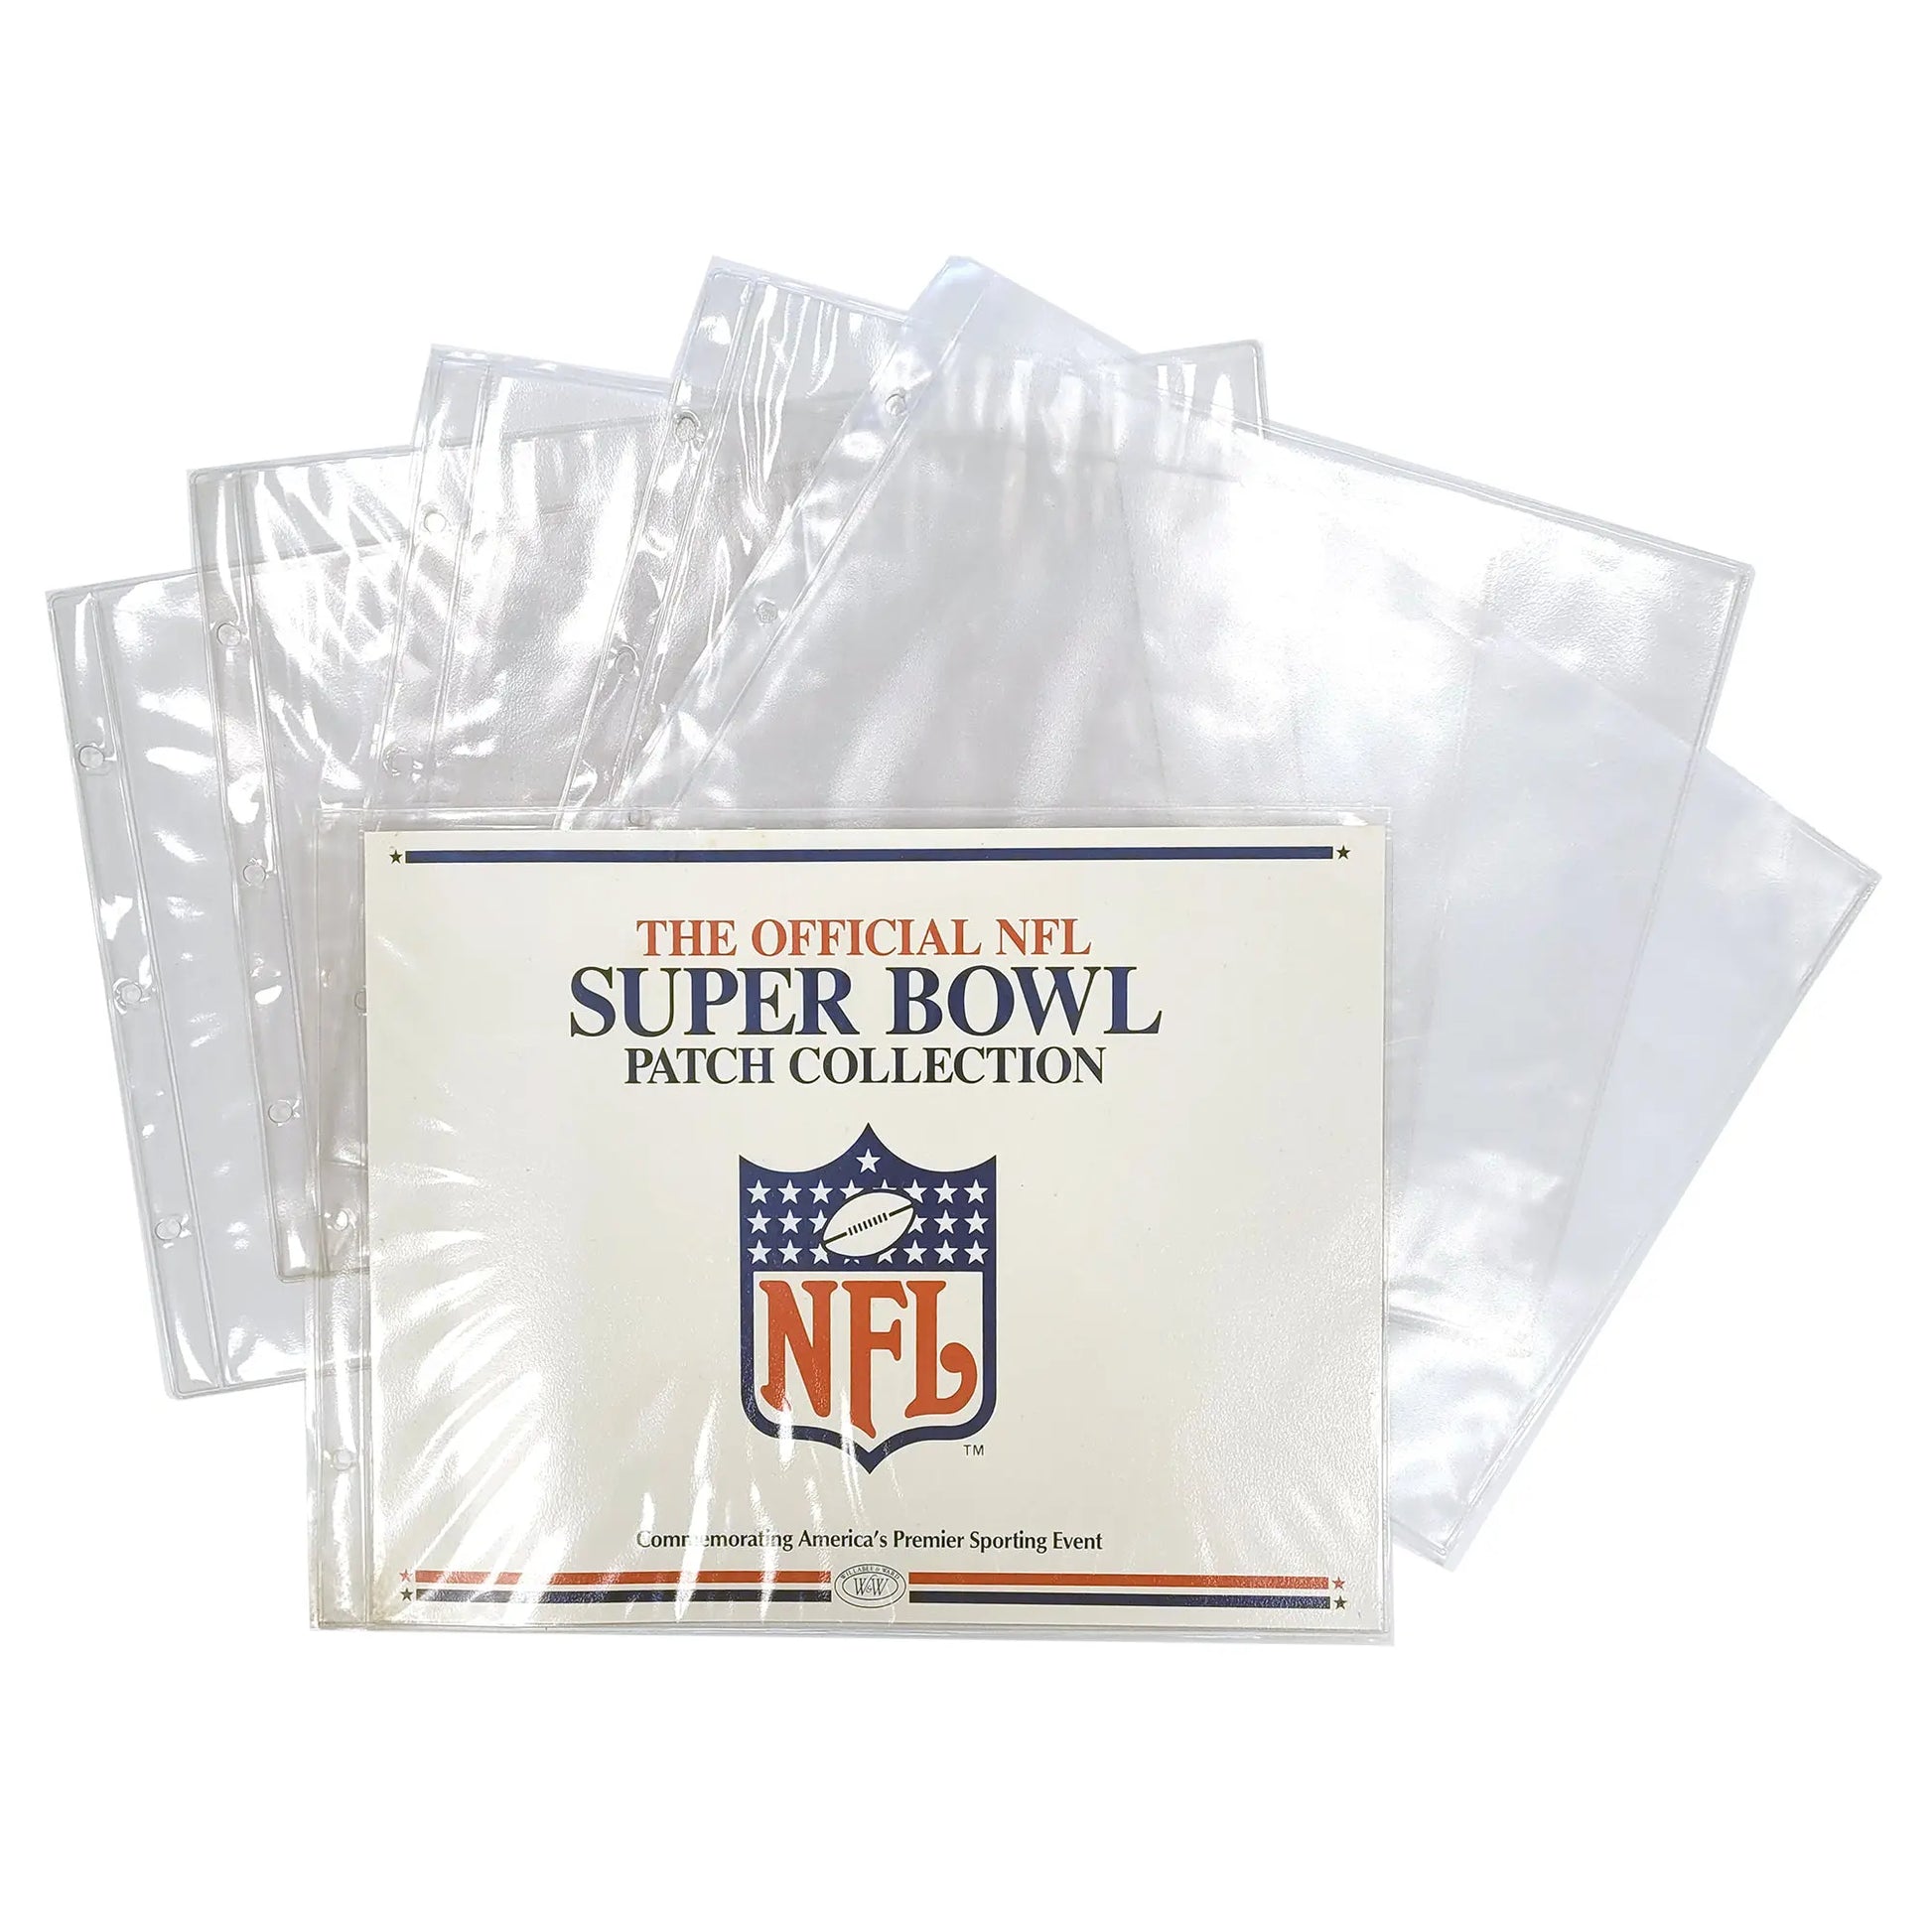 The Official NFL Super Bowl Patch Collection Wallabee & Ward Binder Stater Kit